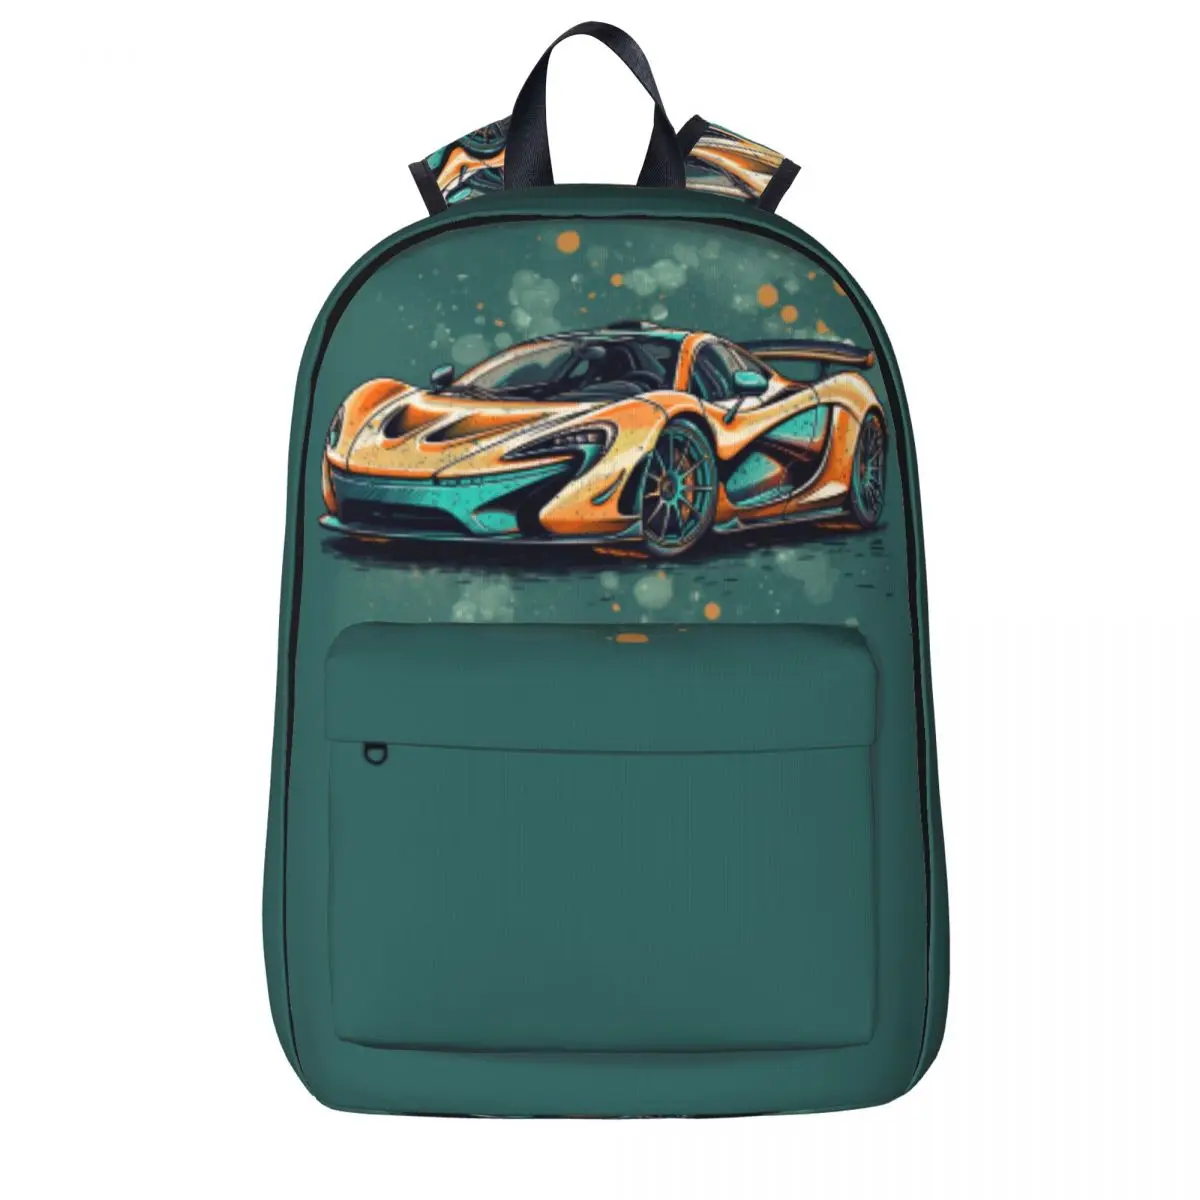 

Powerful Sports Car Backpack Multicolored Retro College Backpacks Student Unisex Modern School Bags Quality Durable Rucksack